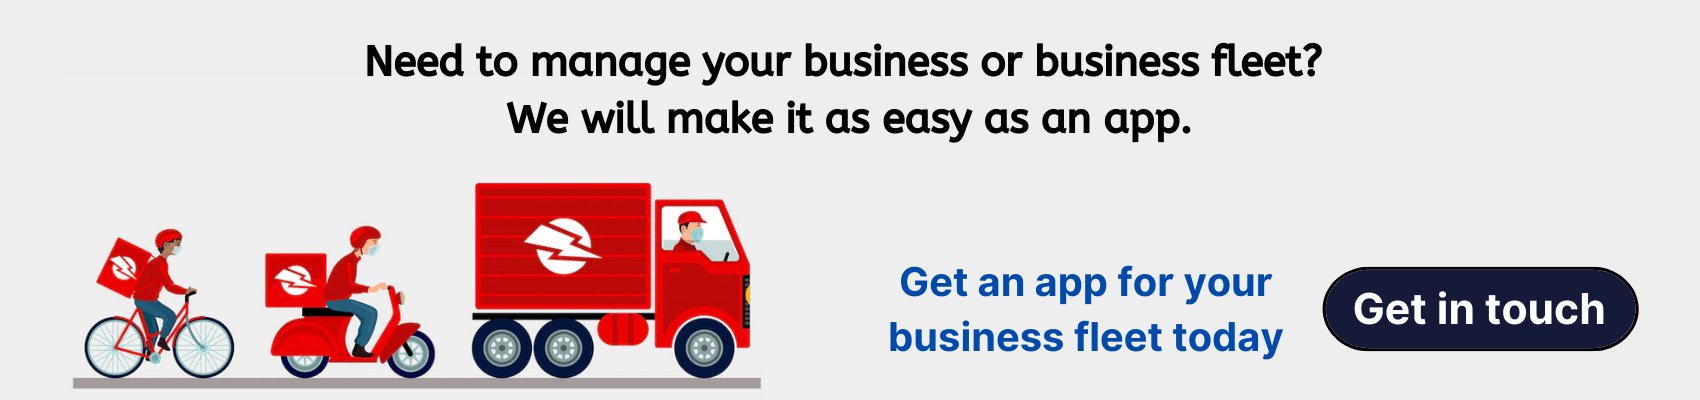 Need to manage your business or business fleet We will make it as easy as an app.